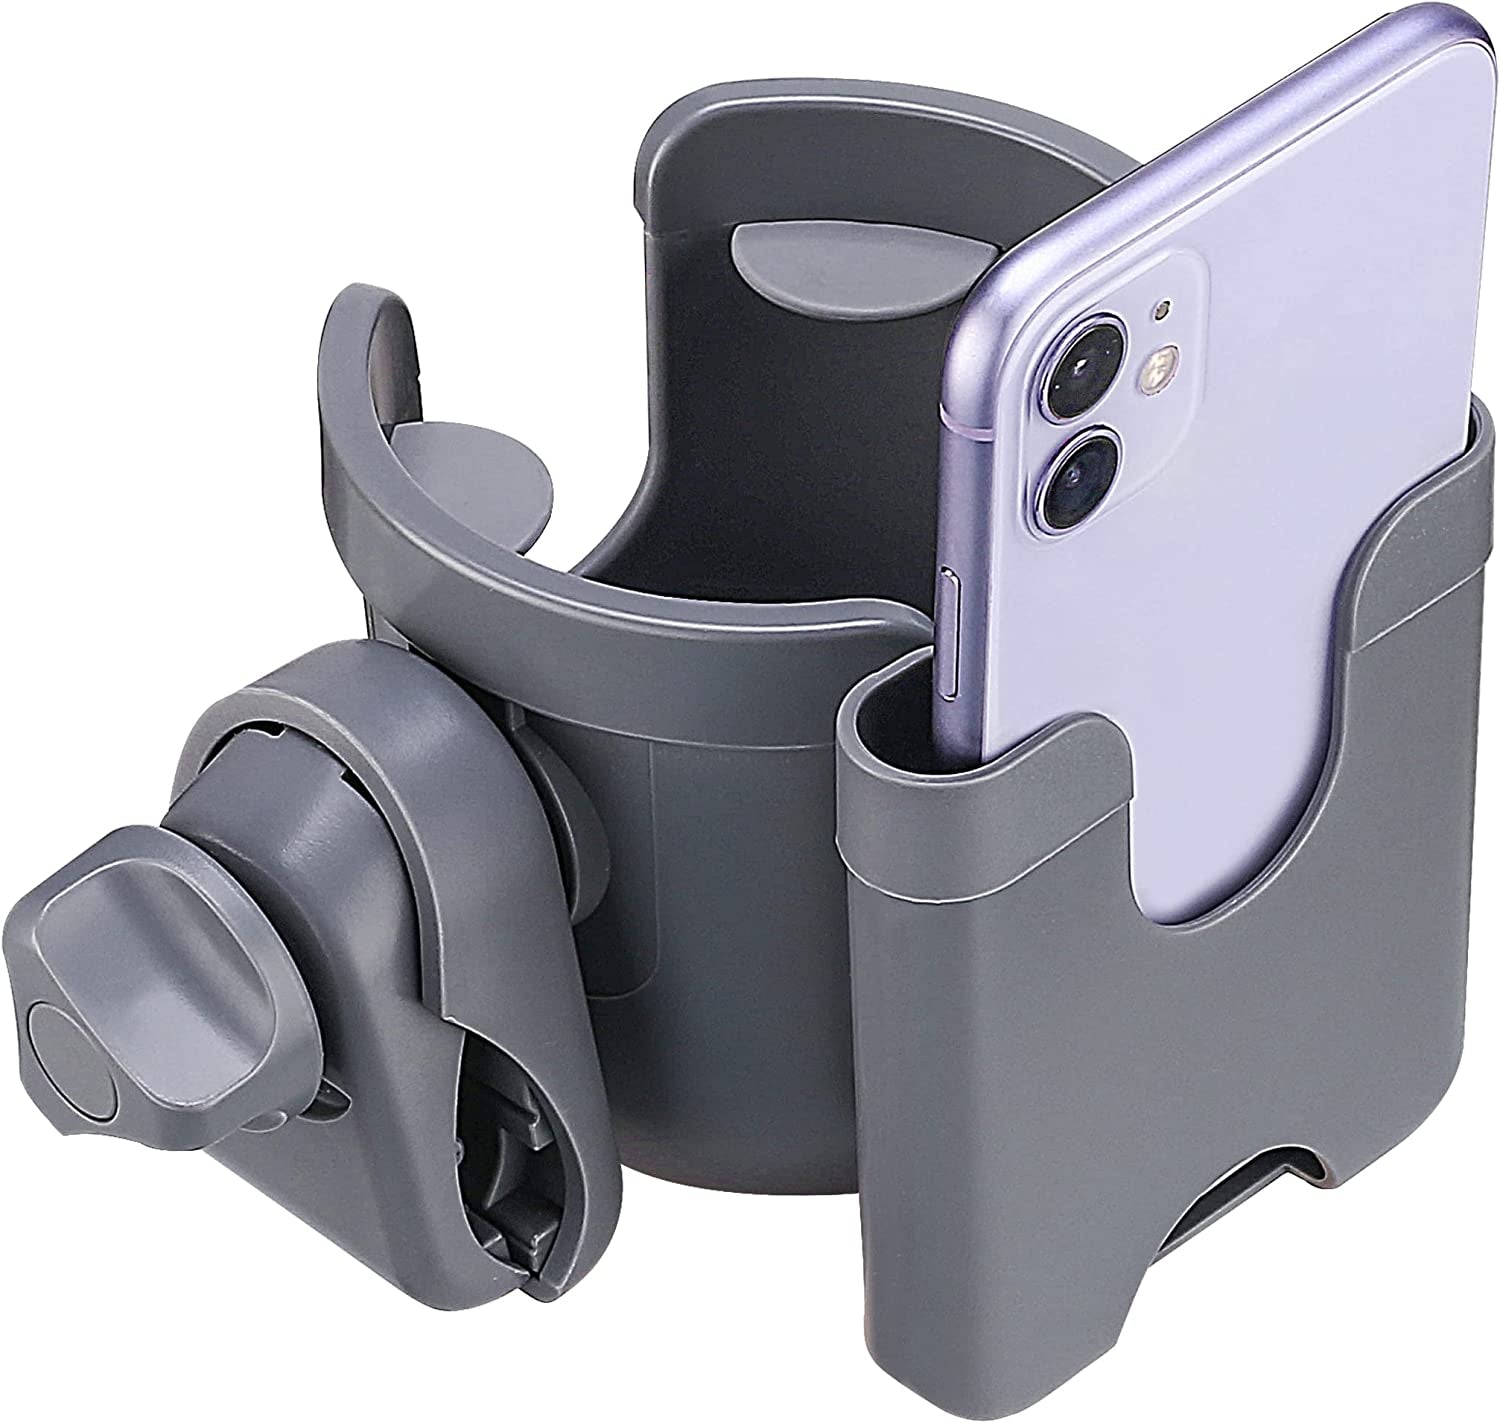 Accmor 2-in-1 Stroller Cup Holder with Phone Holder, Bike Cup